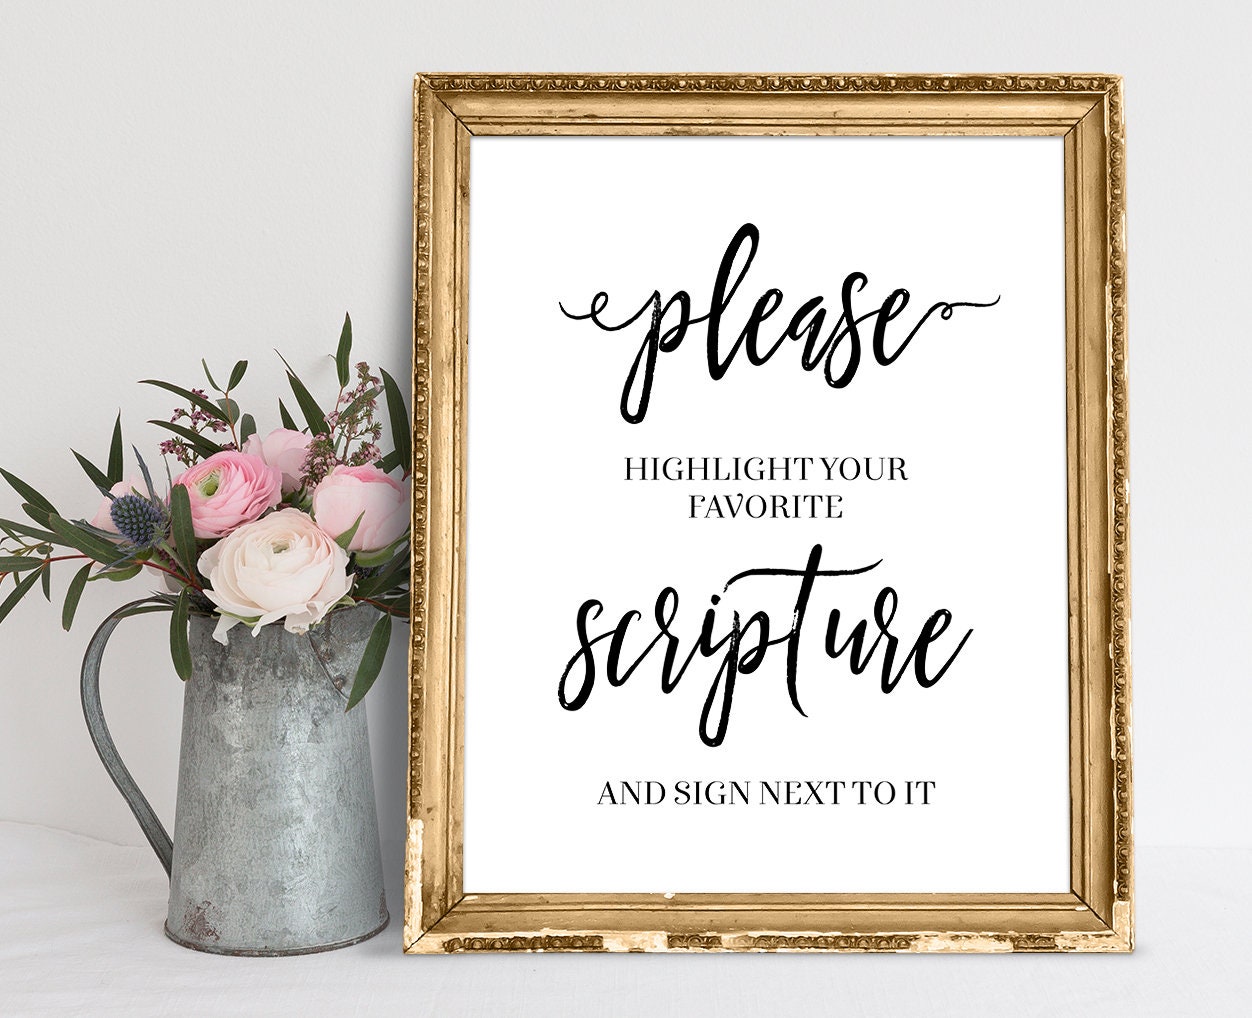 gravid Hold op ørn Please Highlight Your Favorite Scripture and Sign Next to It - Etsy